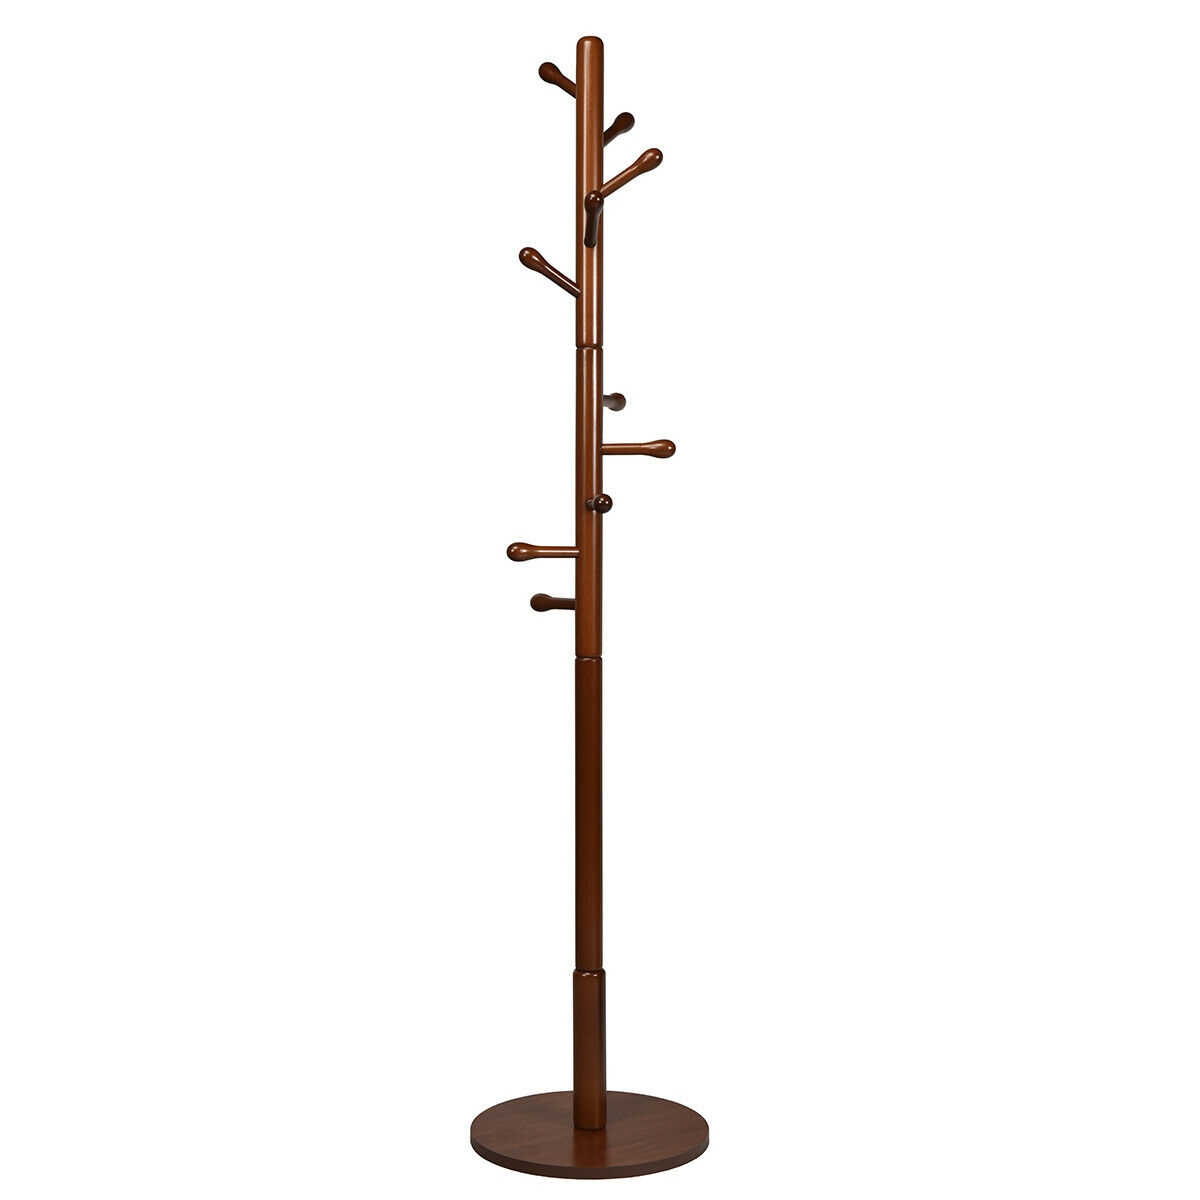 Living Room Warmiehomy Coat Rack Stand with Bench and Shoe Rack Rustic Brown Hallway 76 x 43 x 180cm 180cm Hall Tree Free Standing Industrial Coat Tree with 10 Hooks for Entryway 